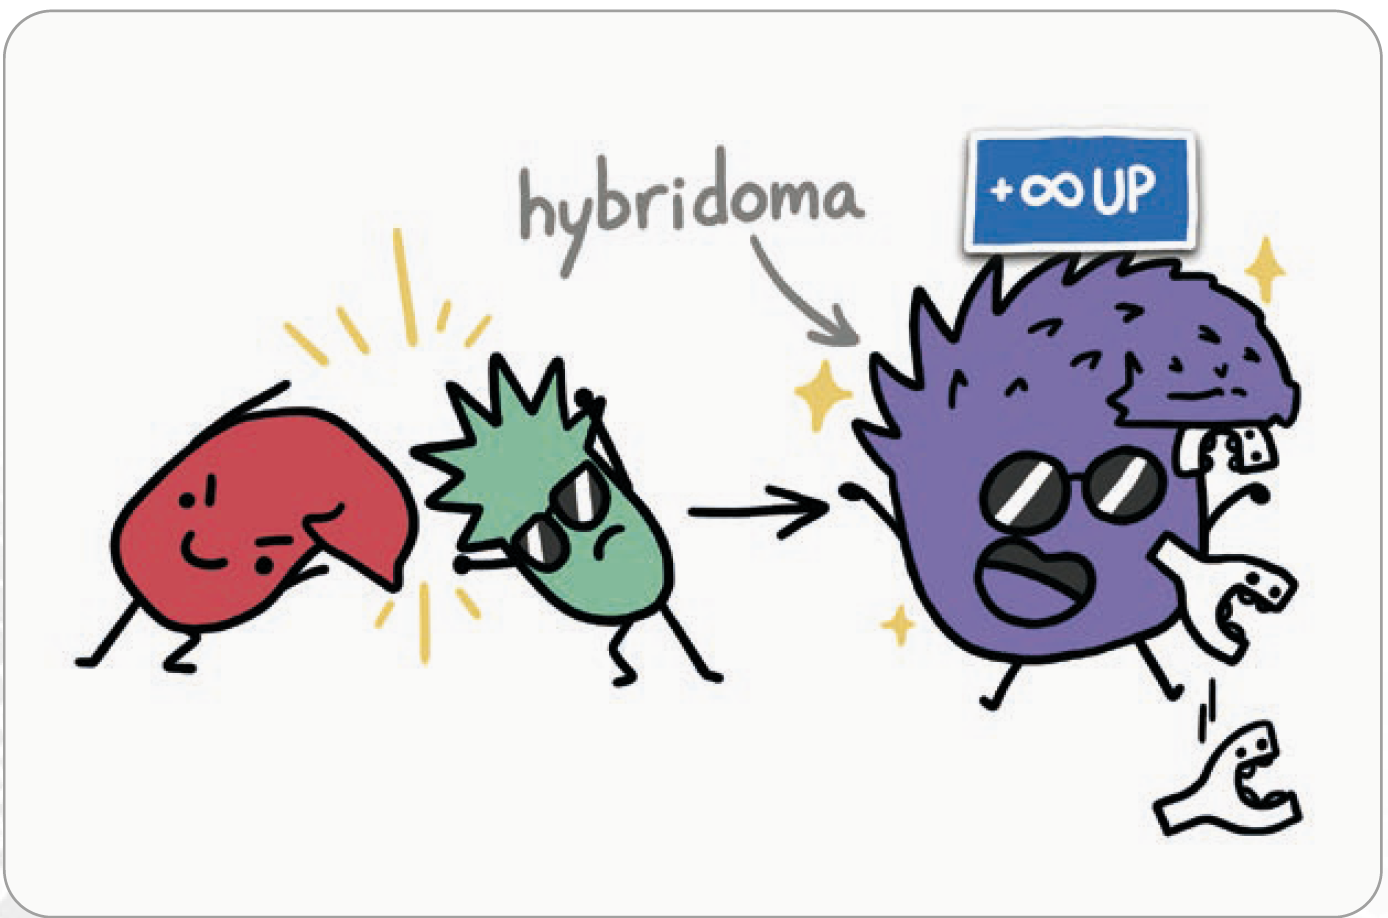 Figure 1: Fusing an antibody producing cell and a cancer cell leads to hybridoma combining both the immortality and the antibody producing capability.